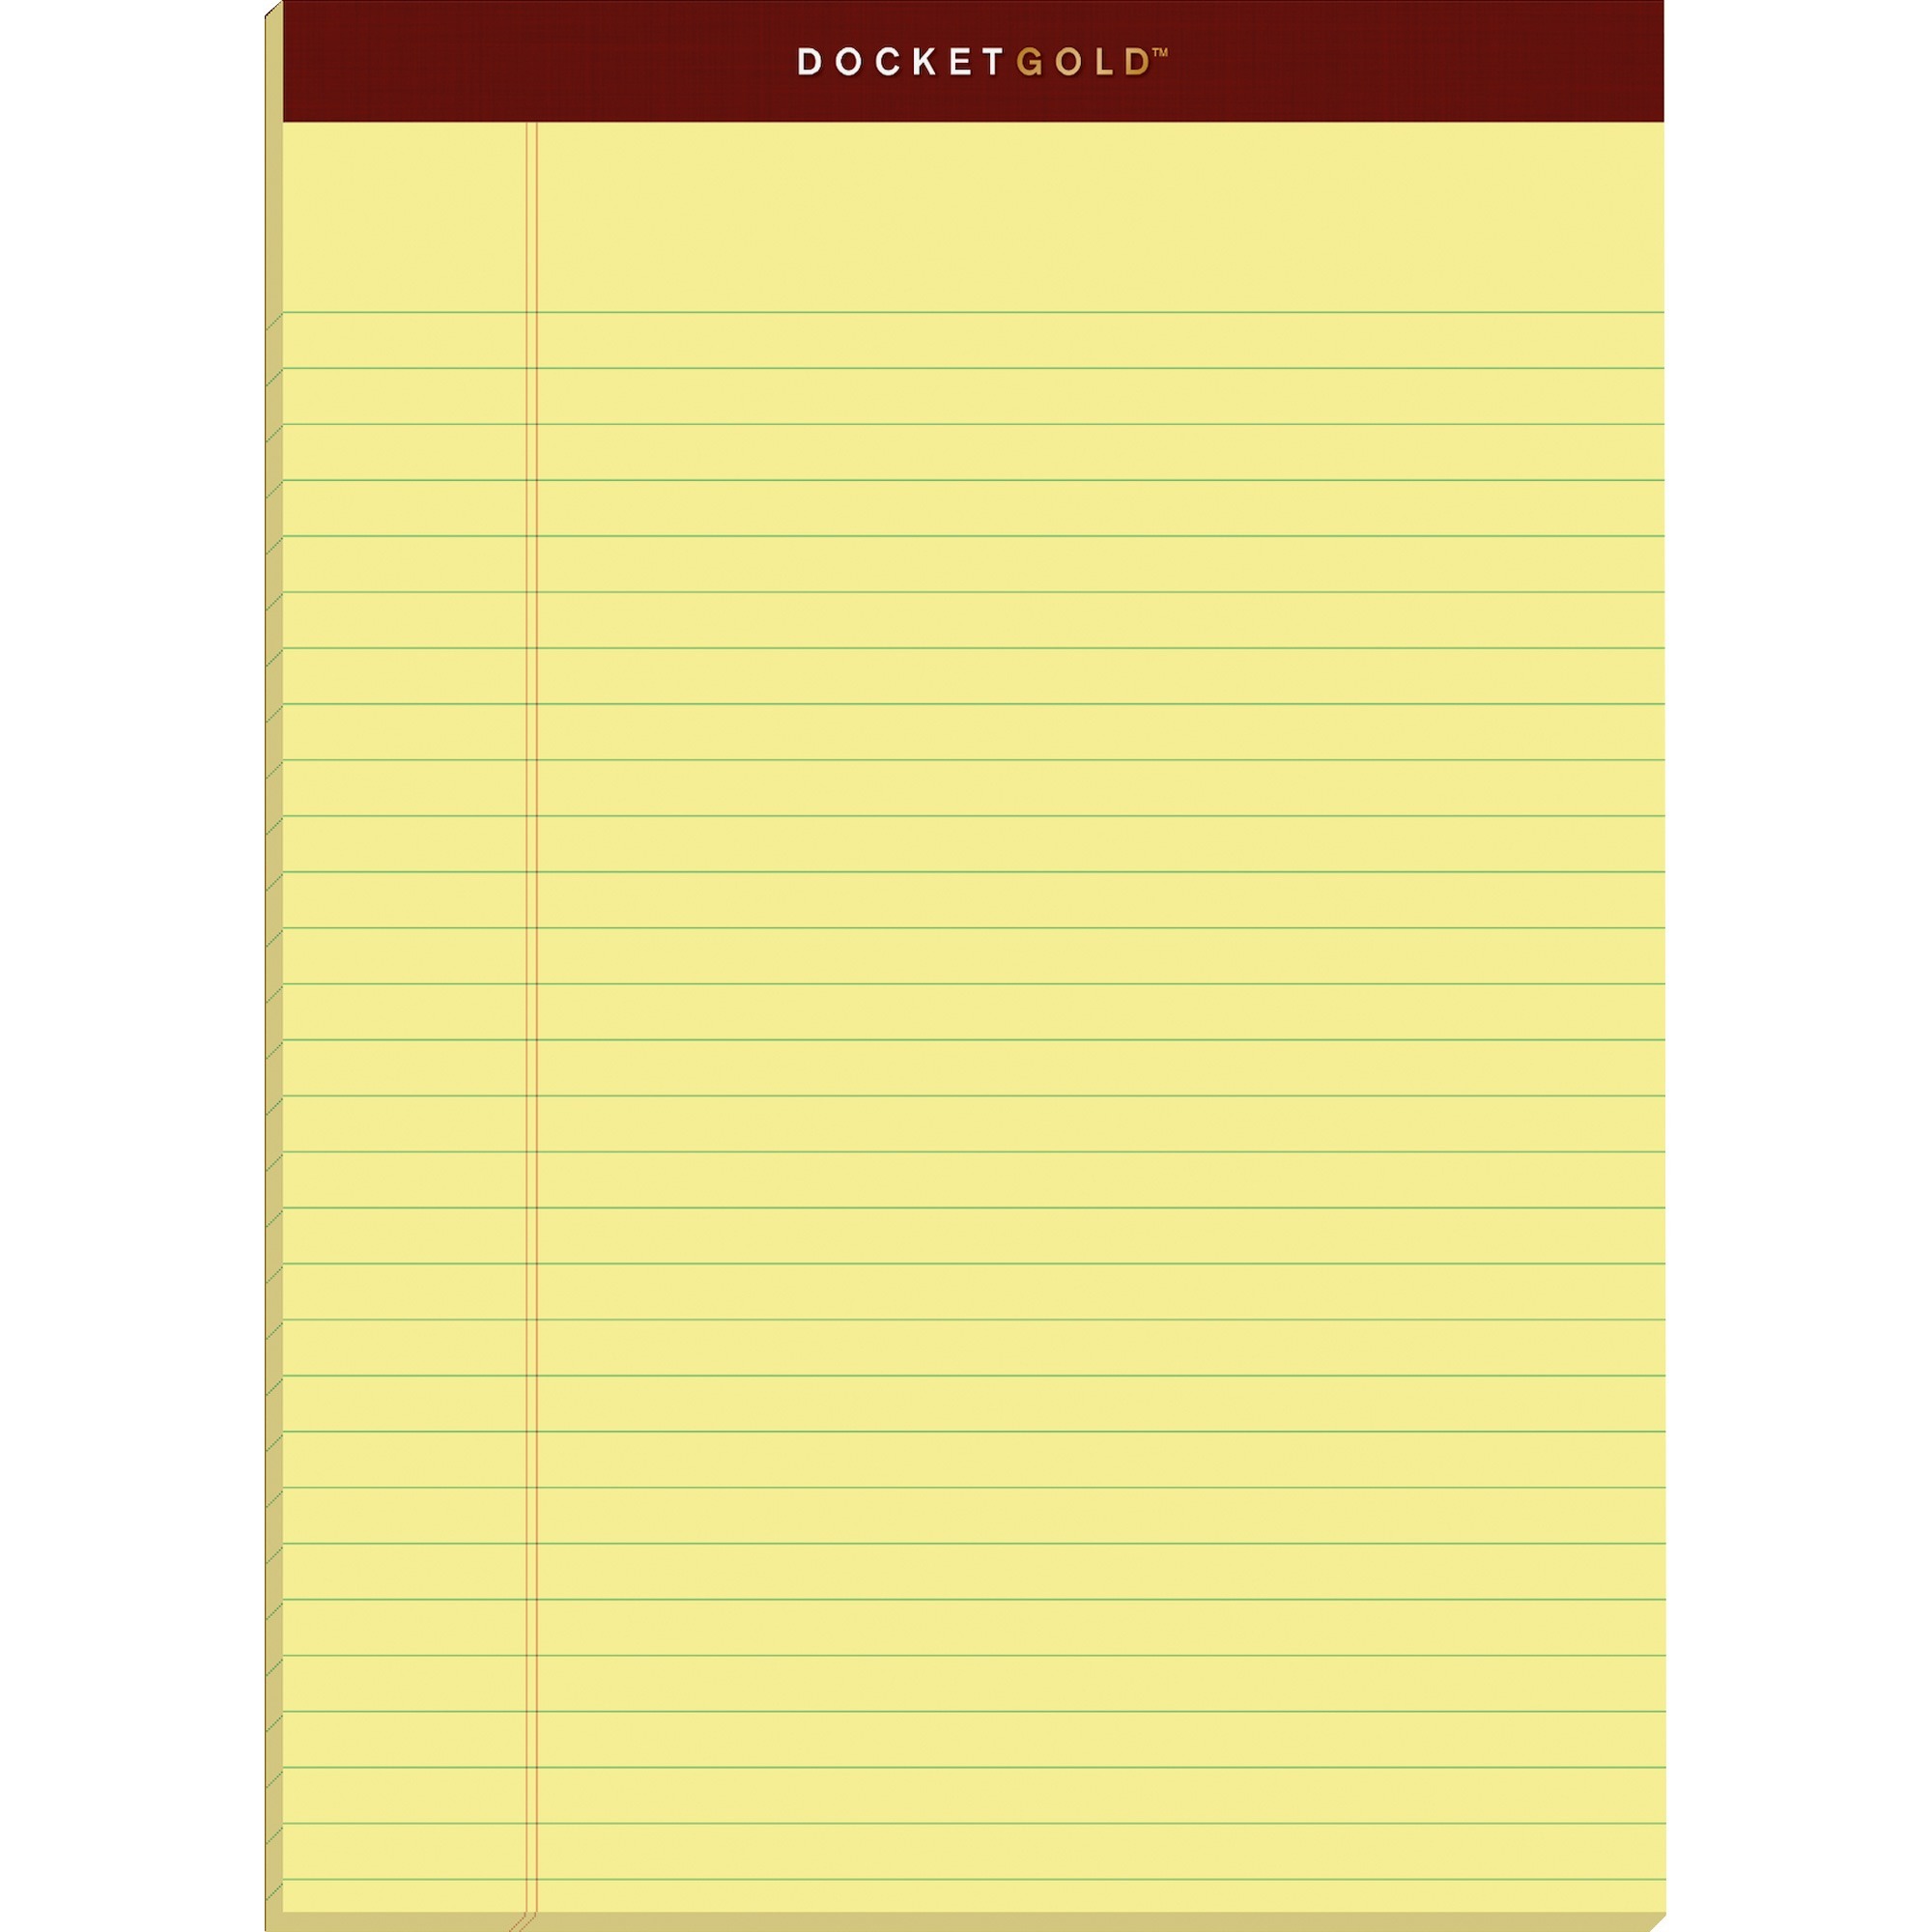 TOPS Docket Gold Legal Pads - Letter - 50 Sheets - Double Stitched - 0.34" Ruled - 20 lb Basis Weight - Letter - 8 1/2" x 11" - 